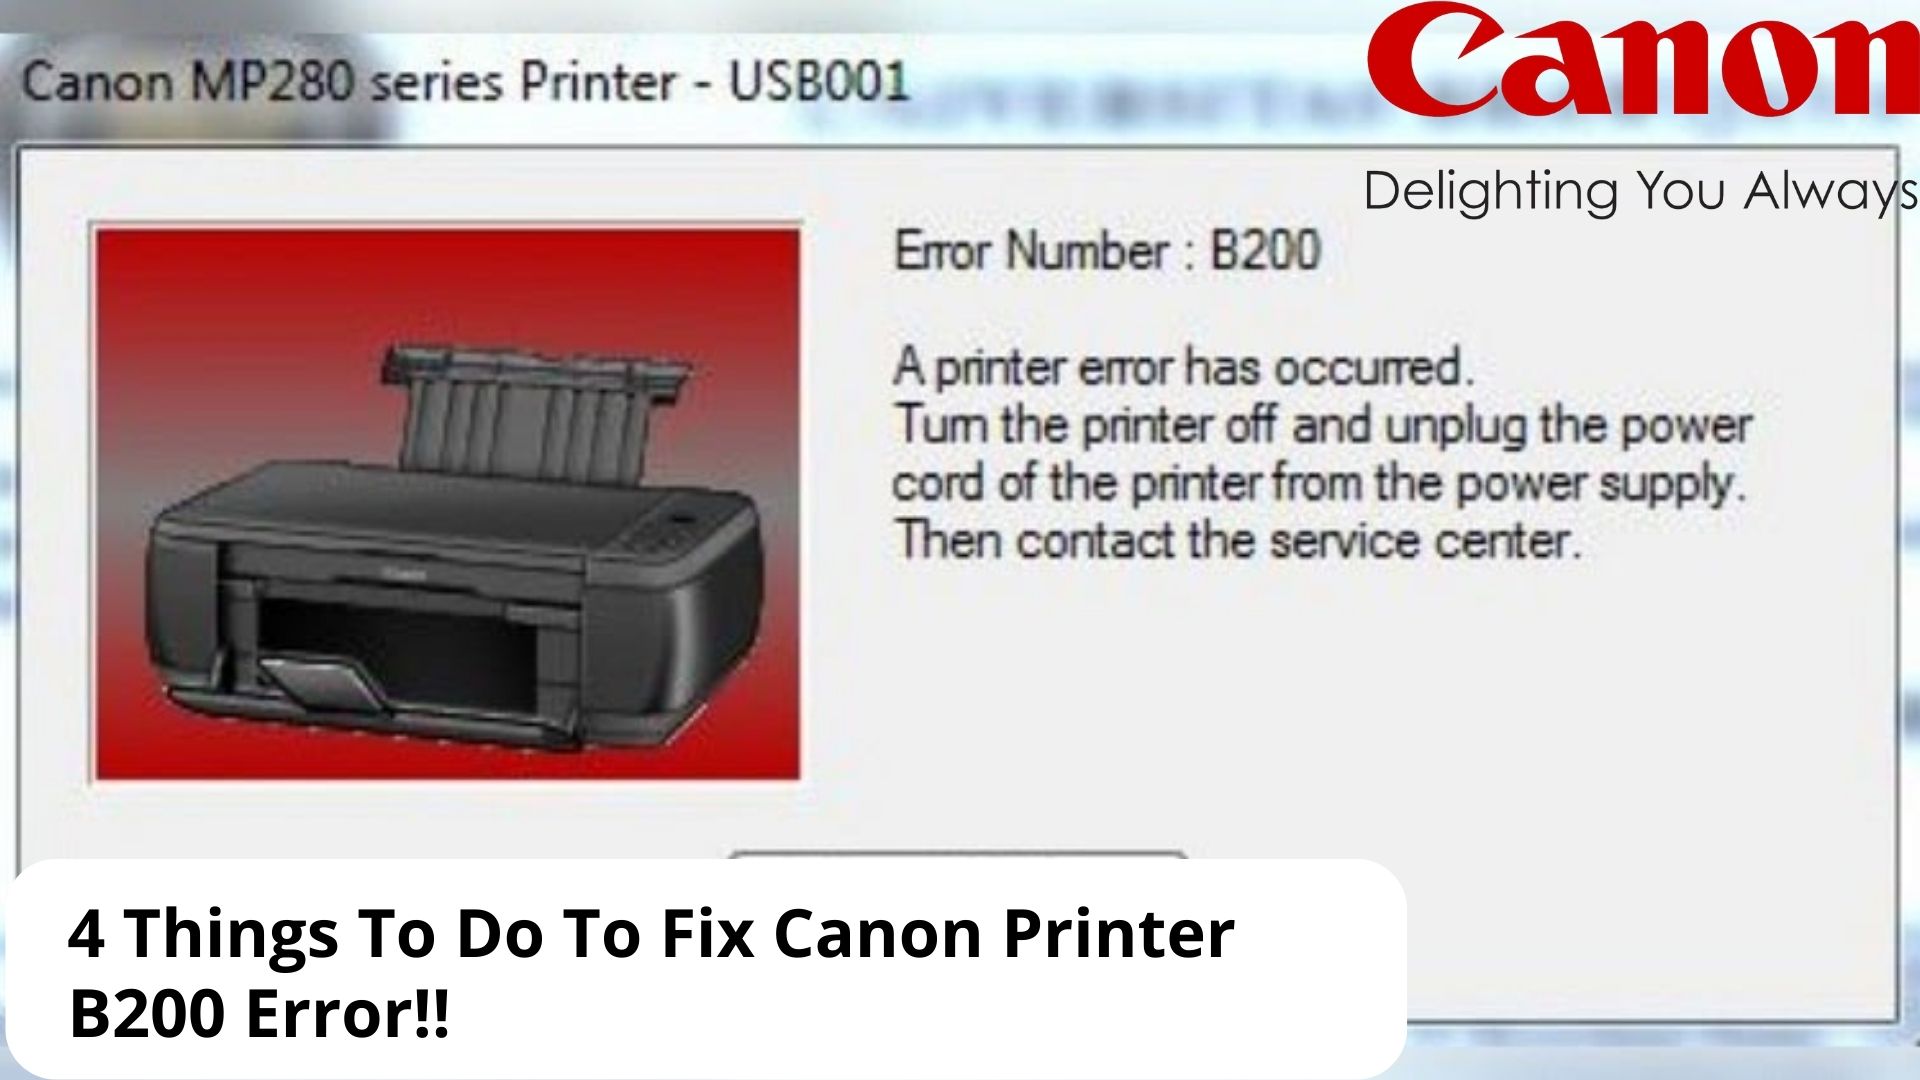 4 Things To Do To Fix Canon Printer B200 Error!!